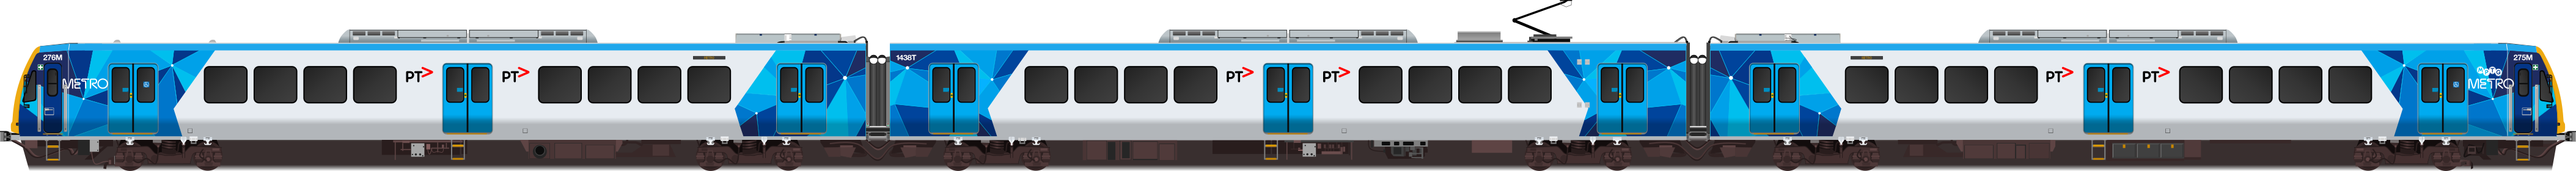 X'Trapolis 100 with modified logo placement (PTV)